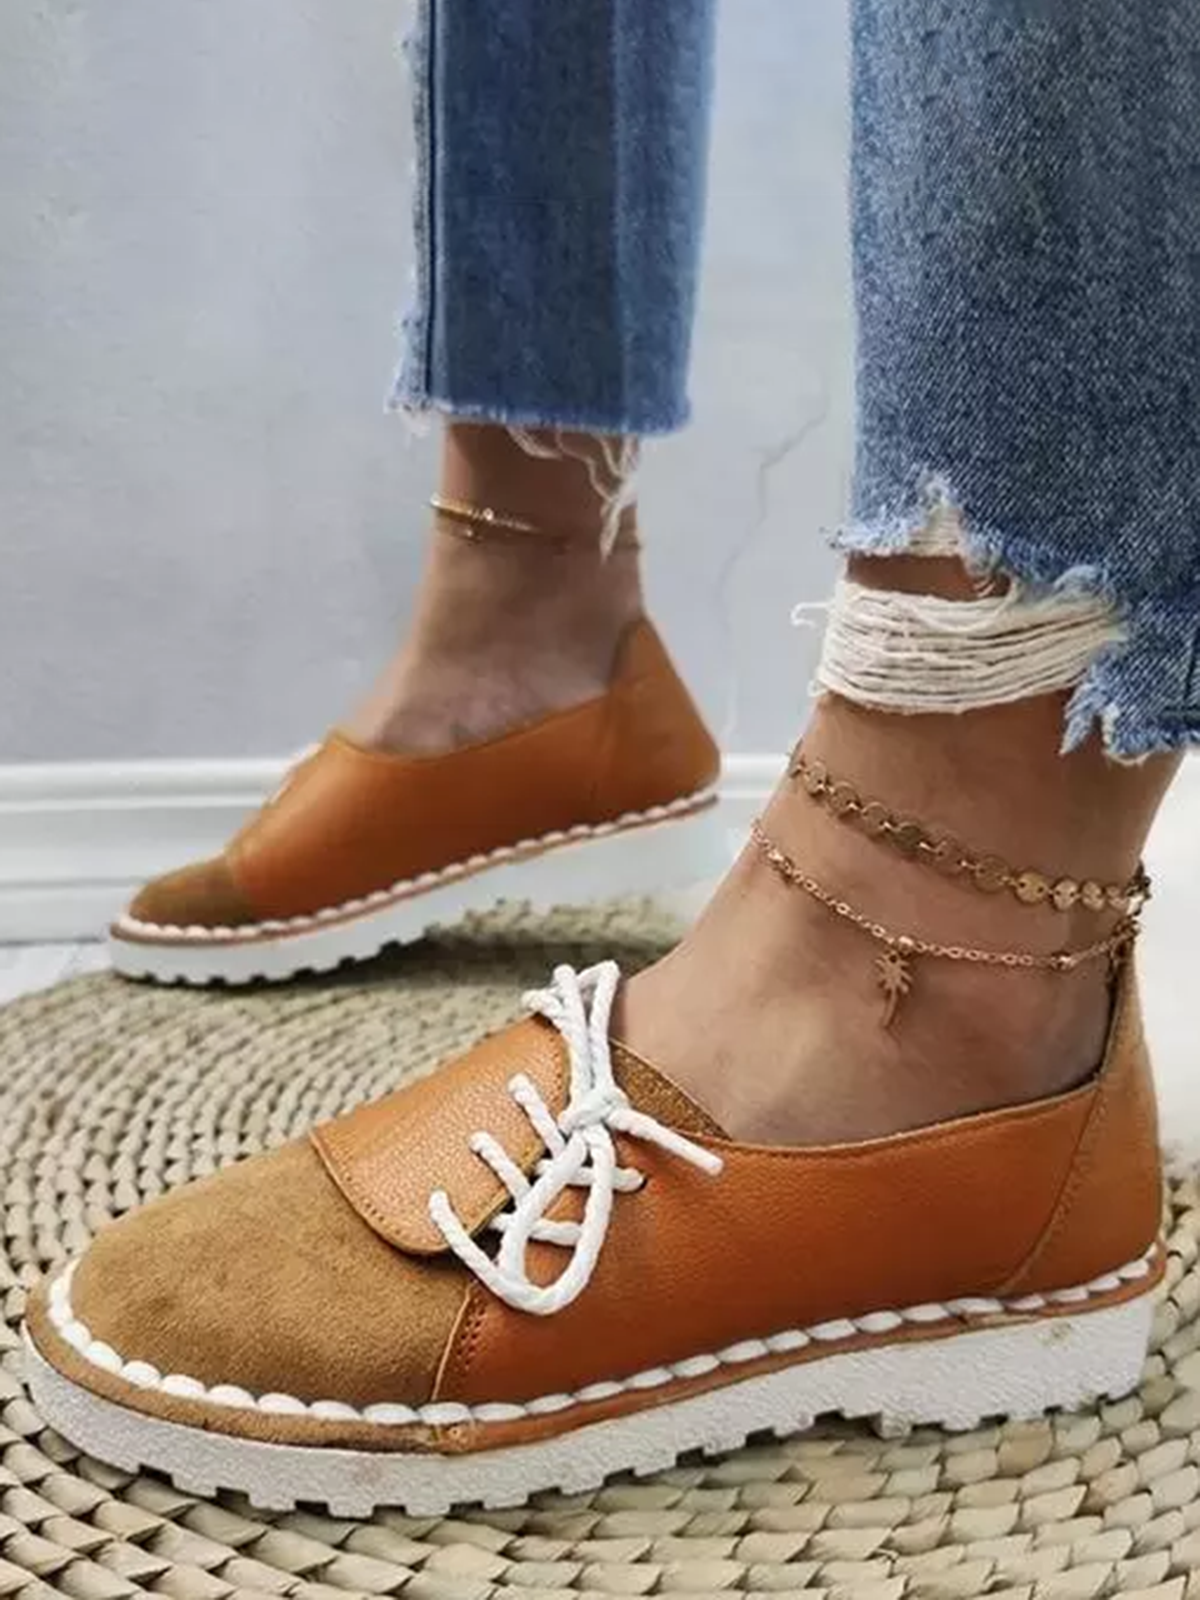 Leather Flats/loafers